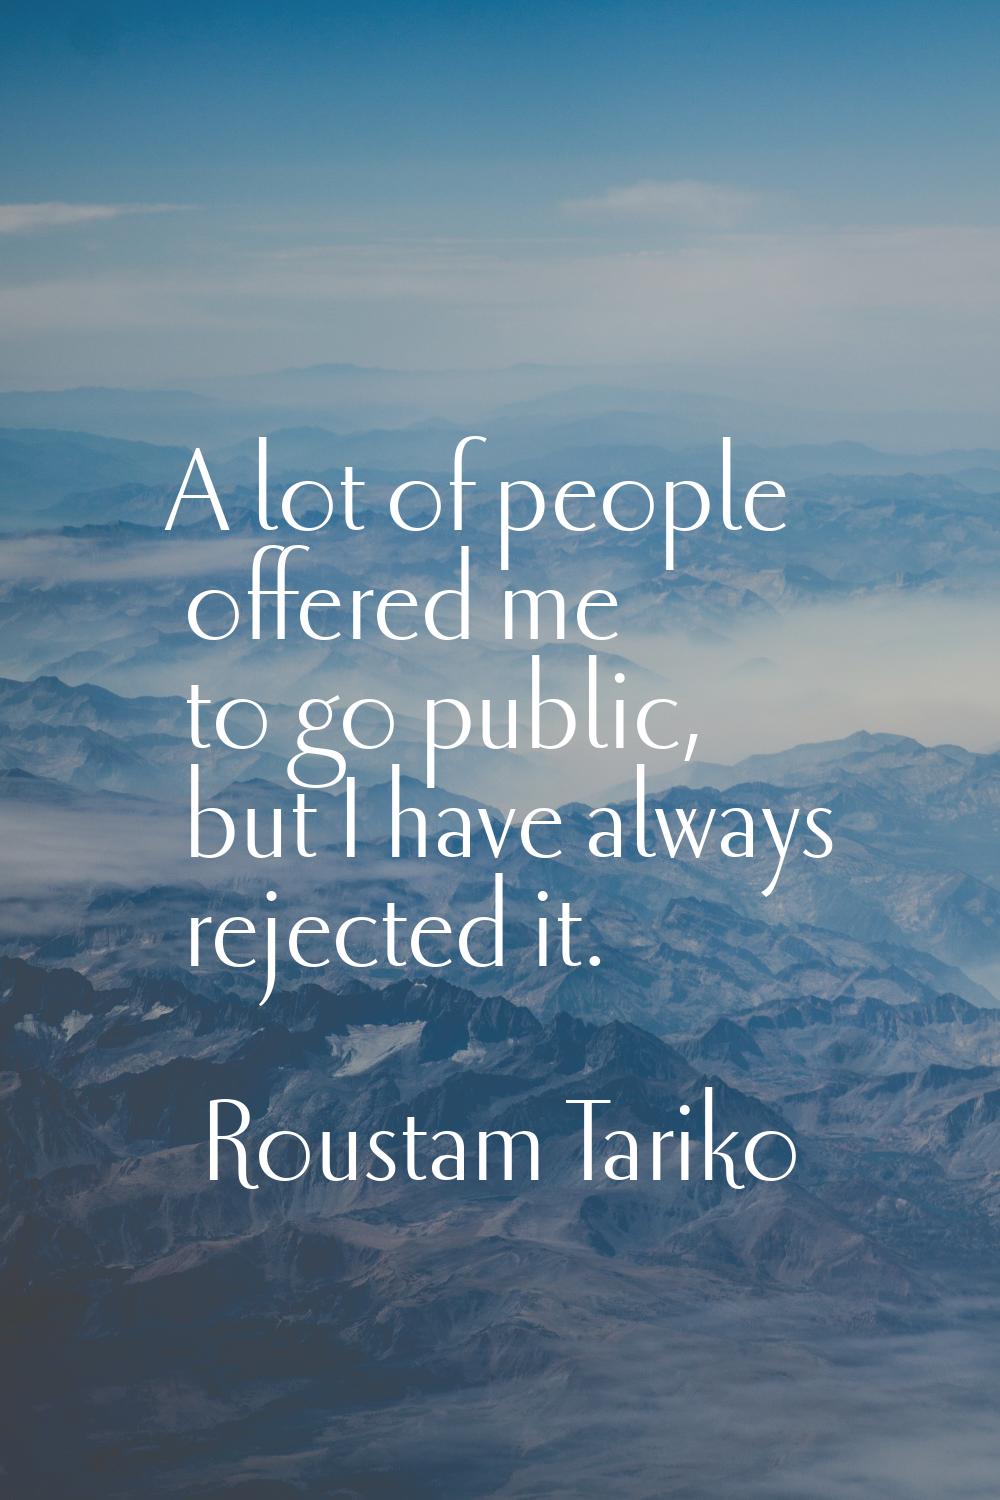 A lot of people offered me to go public, but I have always rejected it.